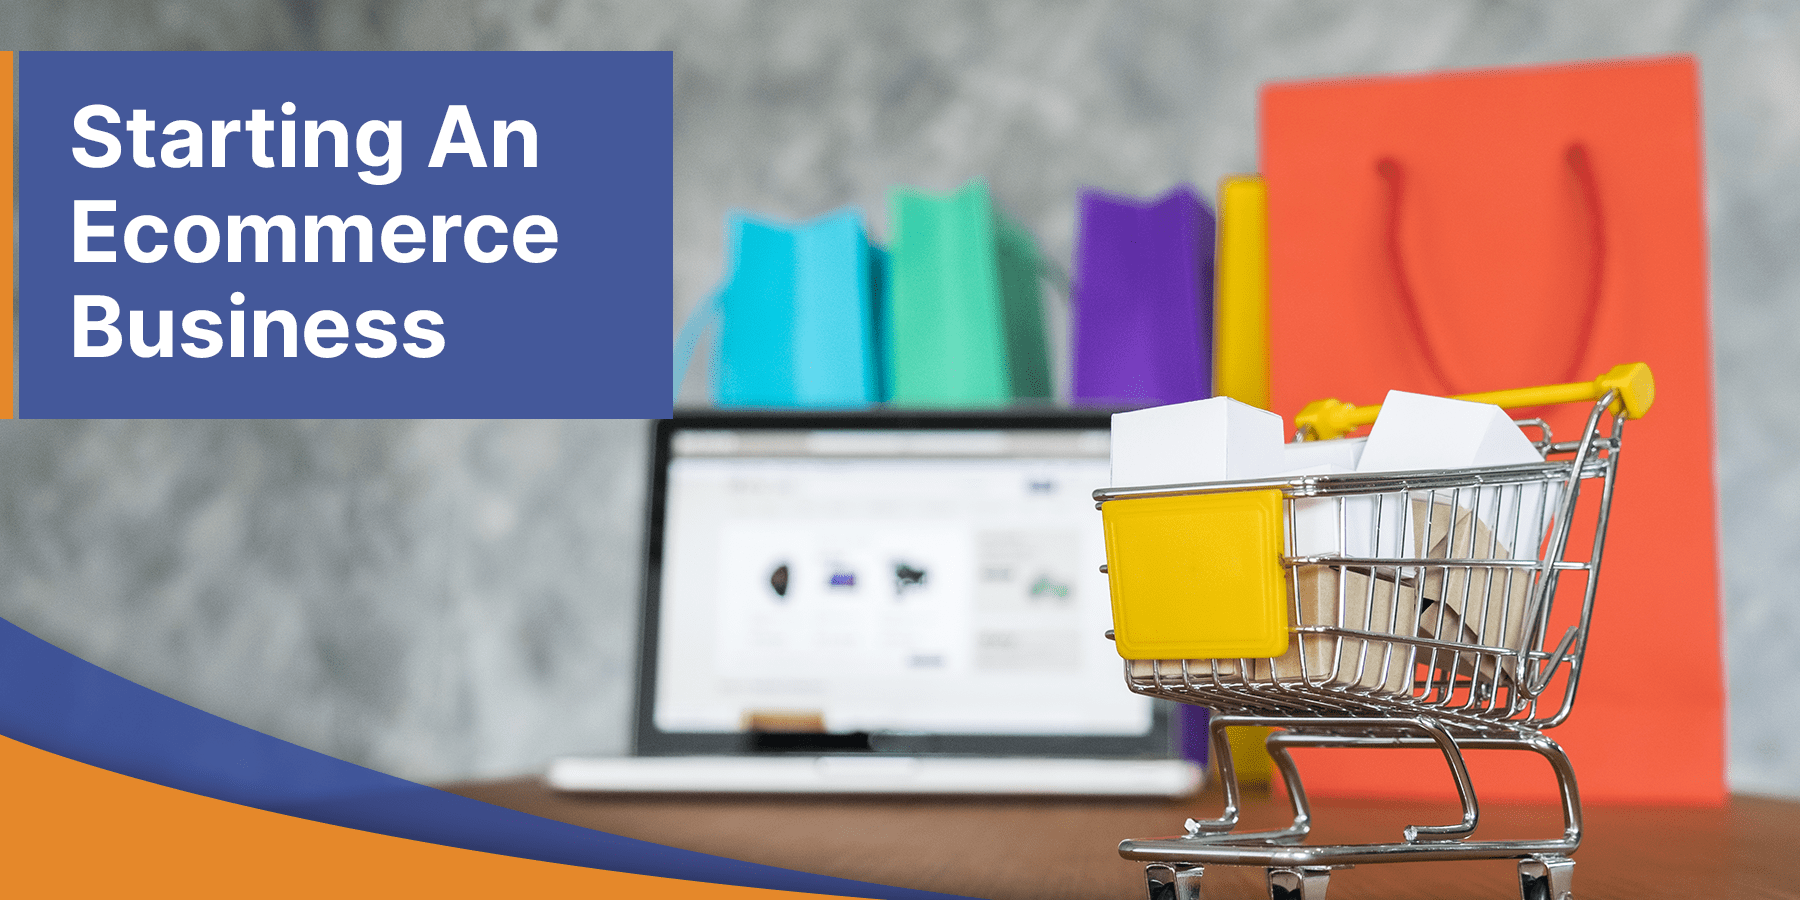 Starting An Ecommerce Business